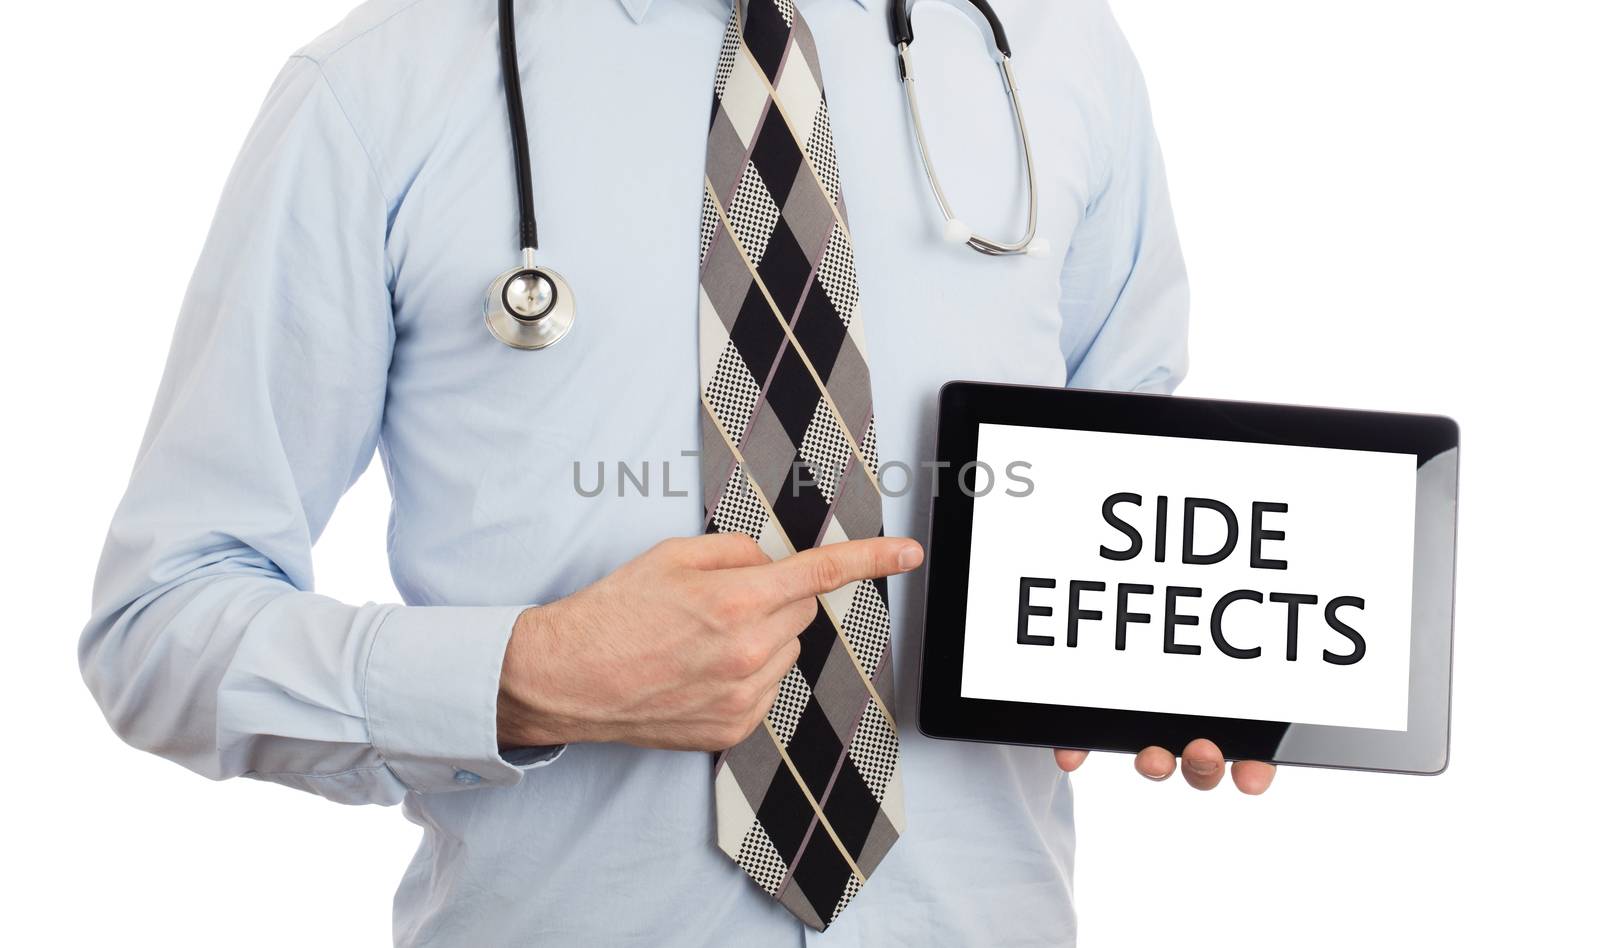 Doctor holding tablet - Side effects by michaklootwijk